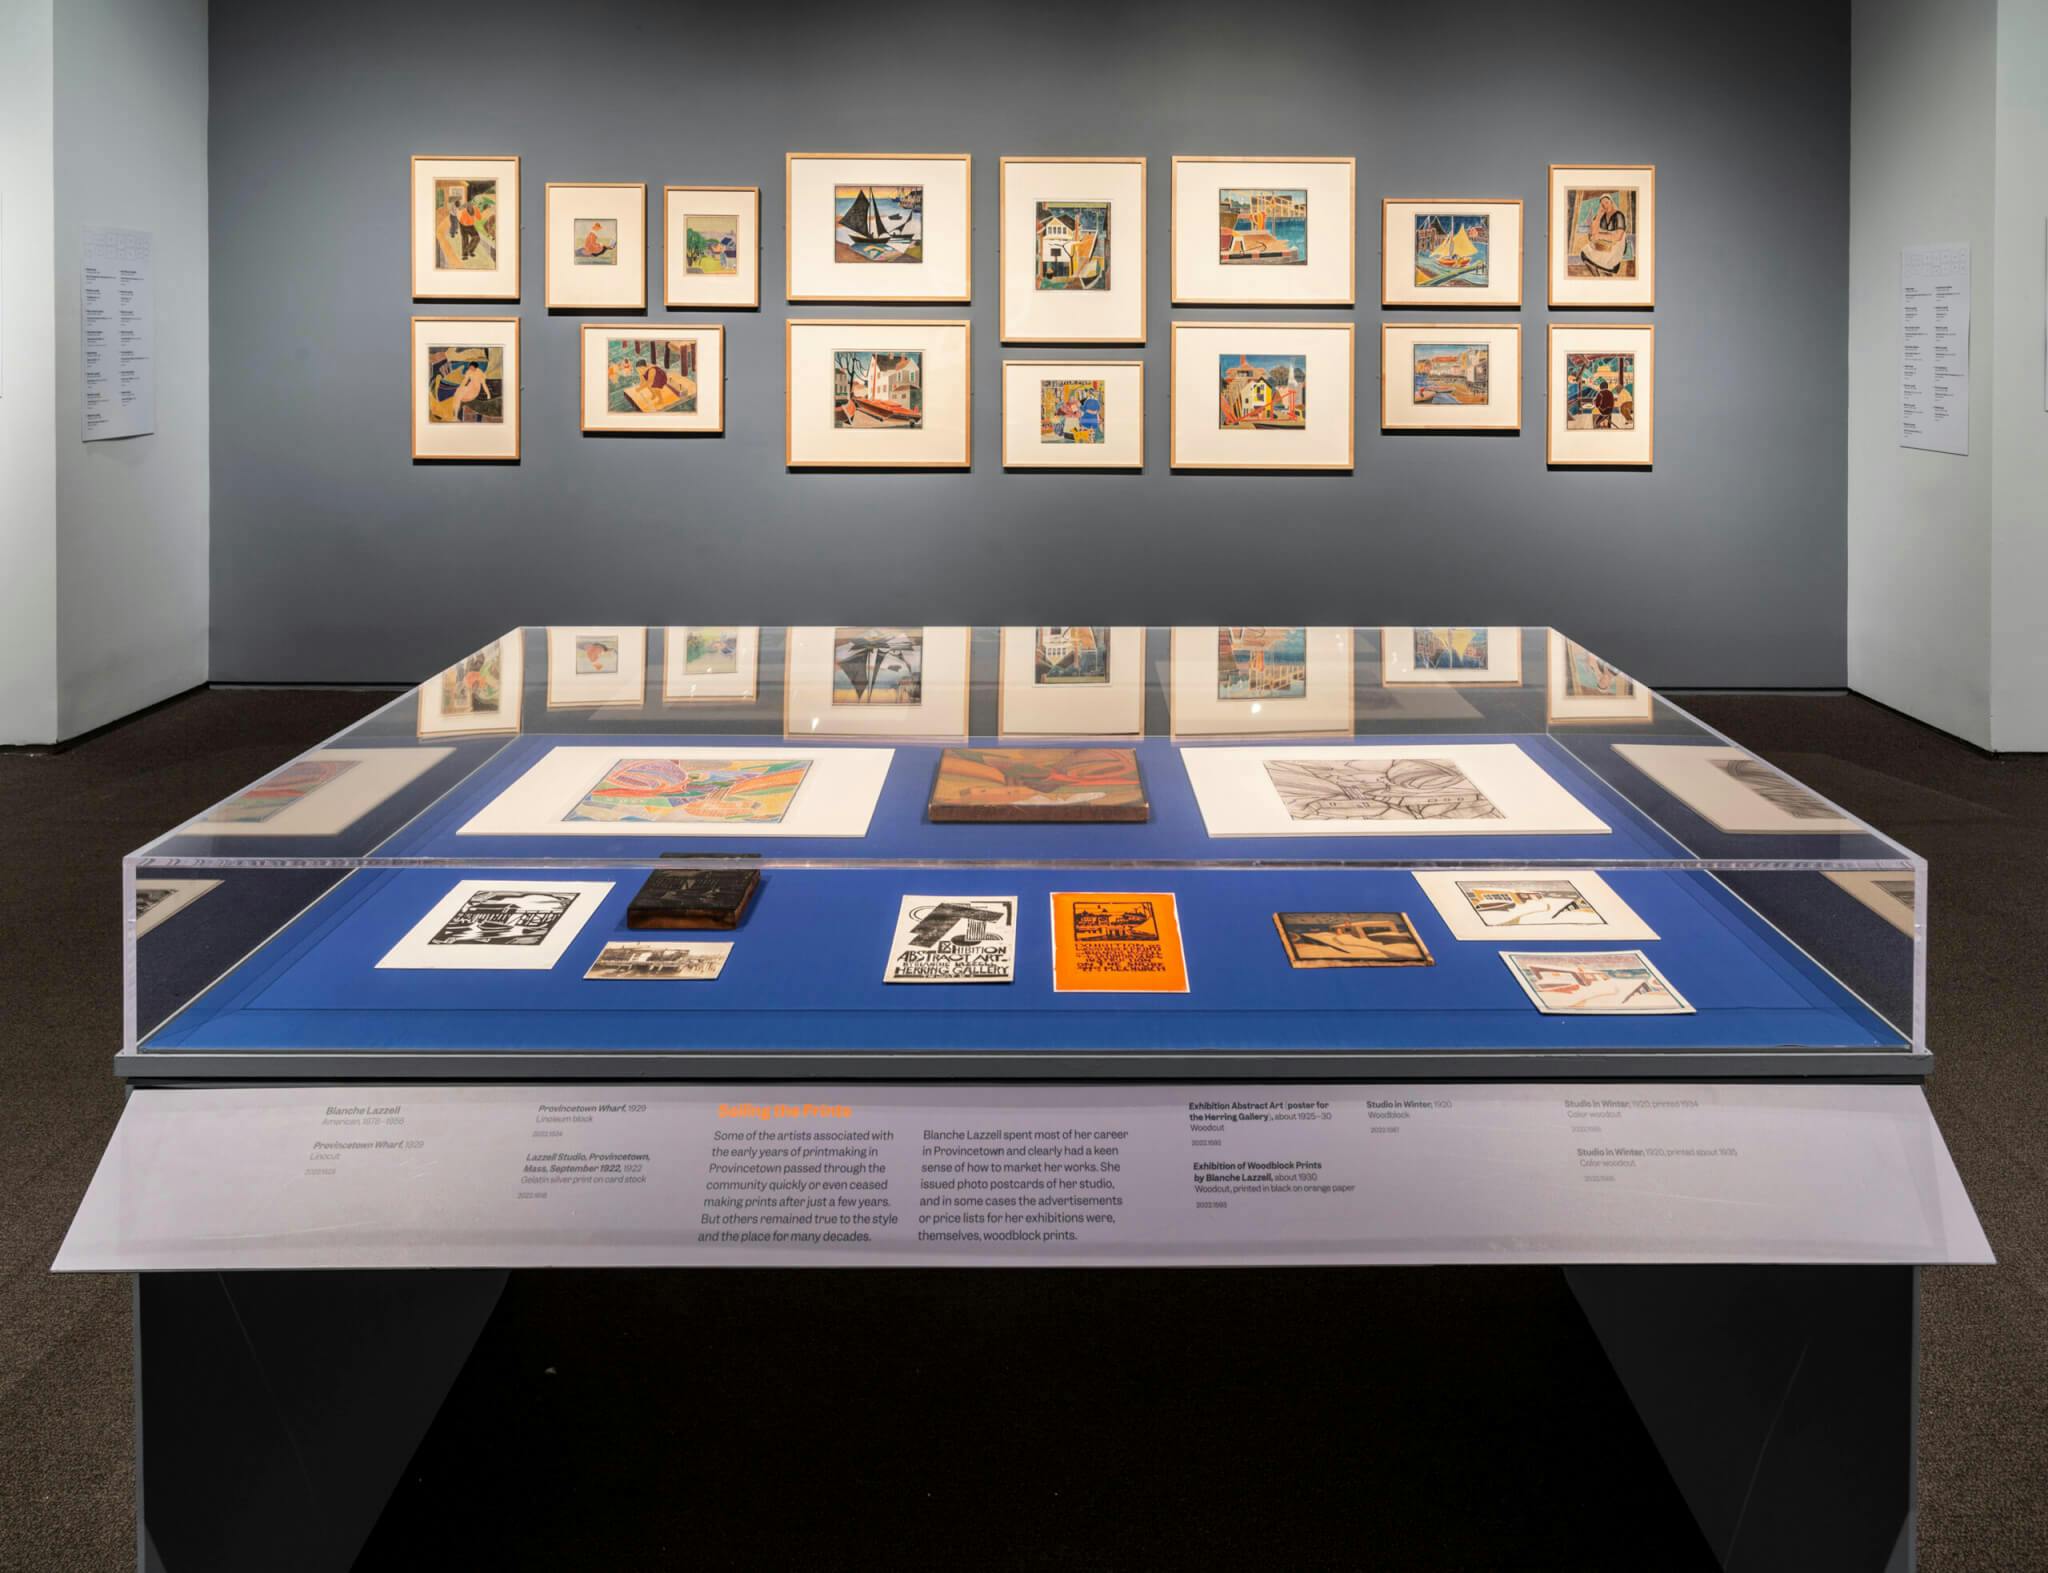 Prints on display within a glass case and lining a gray wall at the Museum of Fine Arts.